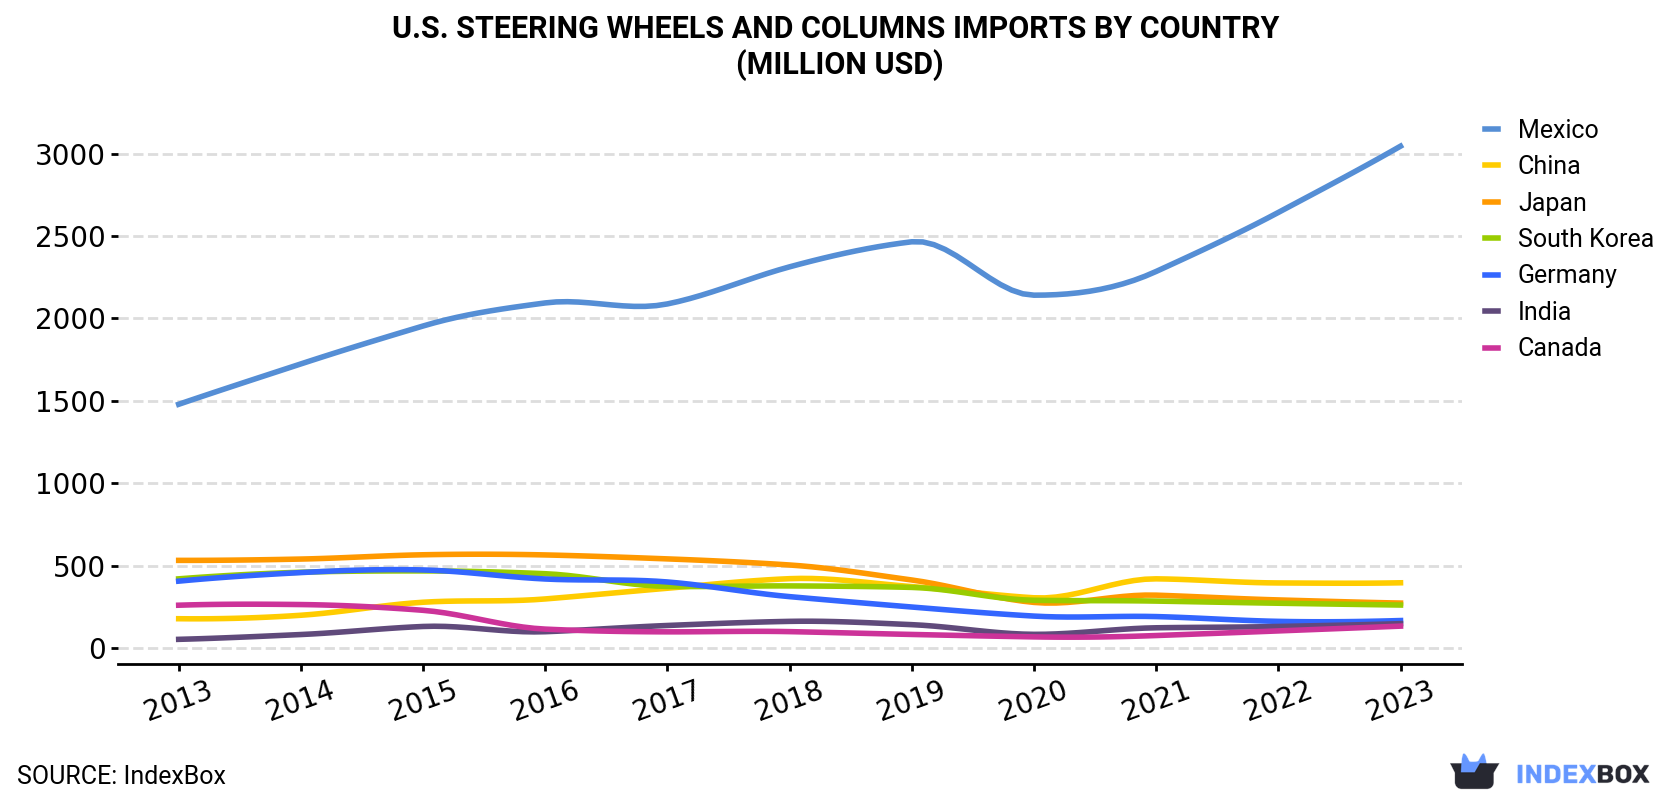 U.S. Steering Wheels And Columns Imports By Country (Million USD)